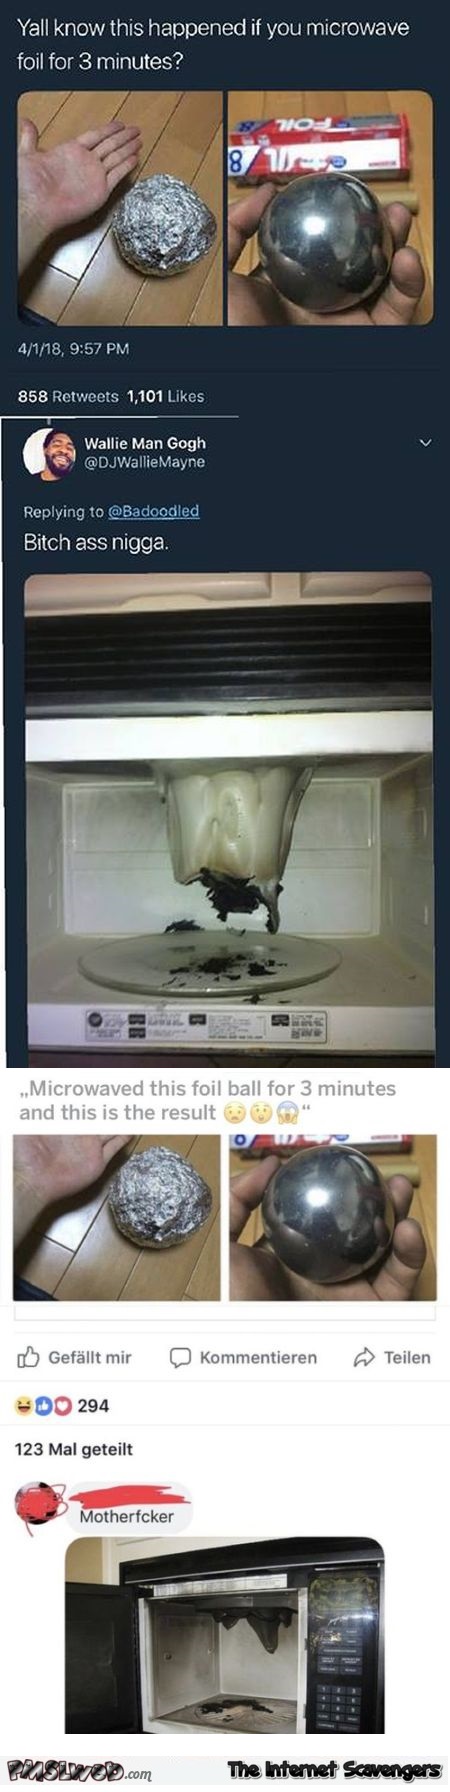 Microwave a foil ball for 3 min funny prank - Funny Posts and comments @PMSLweb.com